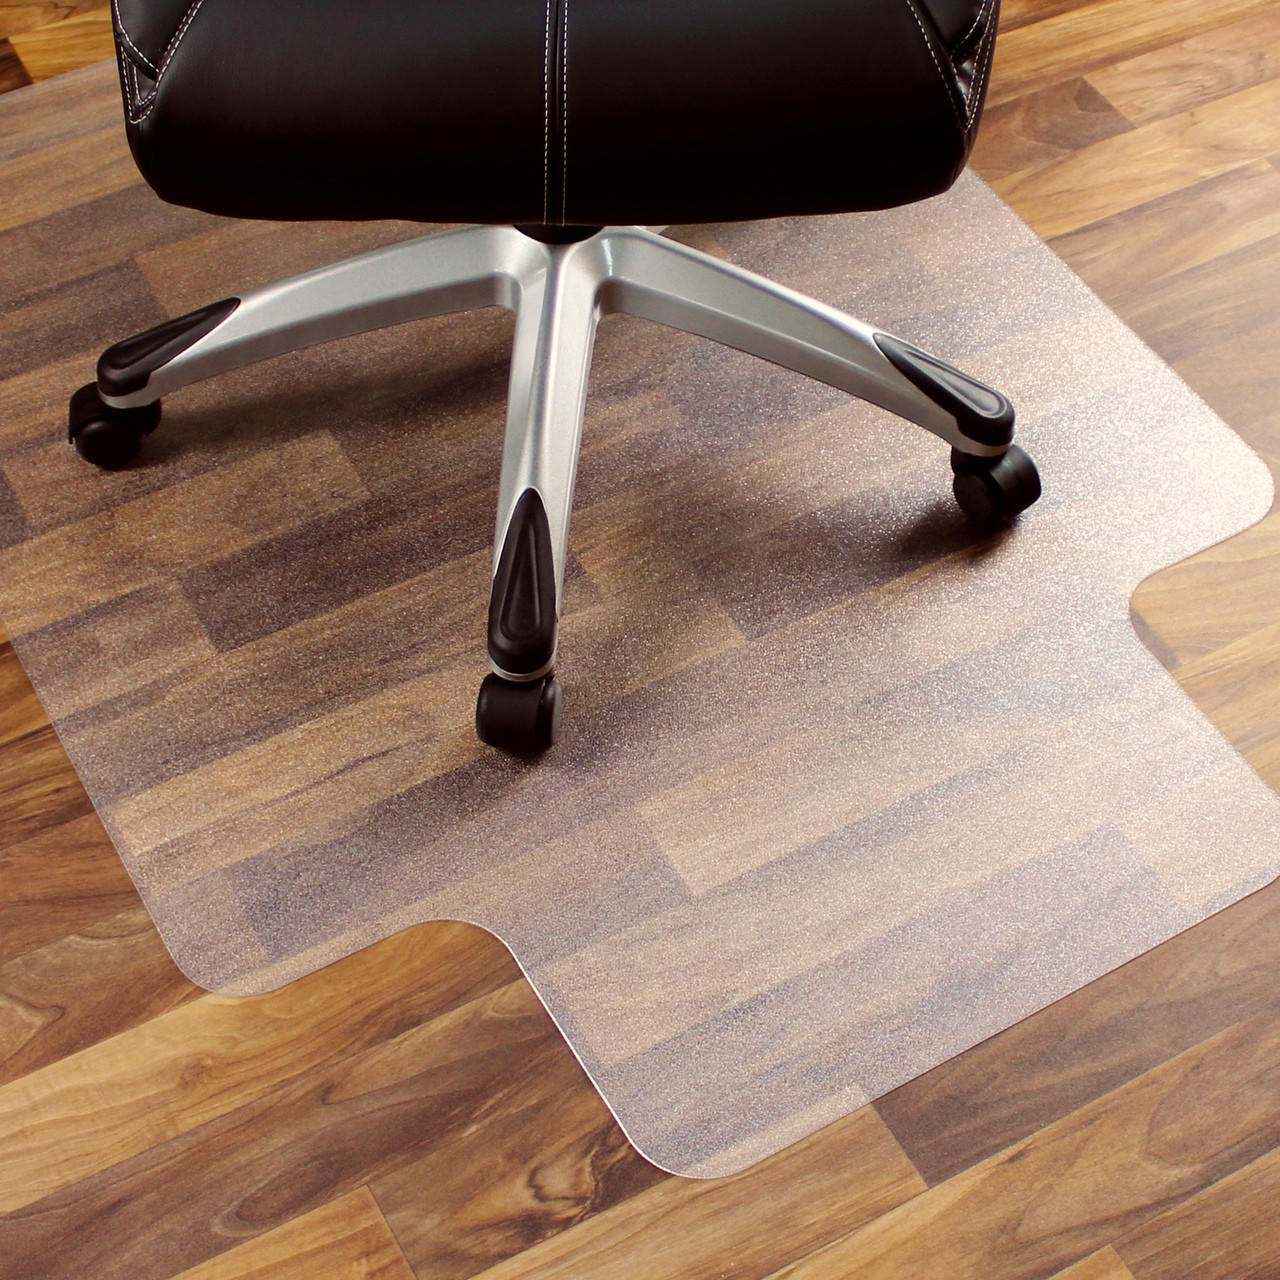 https://cdn11.bigcommerce.com/s-fjwps1jbkv/images/stencil/1280x1280/products/140/3970/marvelux-polycarbonate-pc-lipped-chair-mat-for-hard-floors-or-transparent-hardwood-floor-protector-or-multiple-sizes__53908.1689079669.jpg?c=2